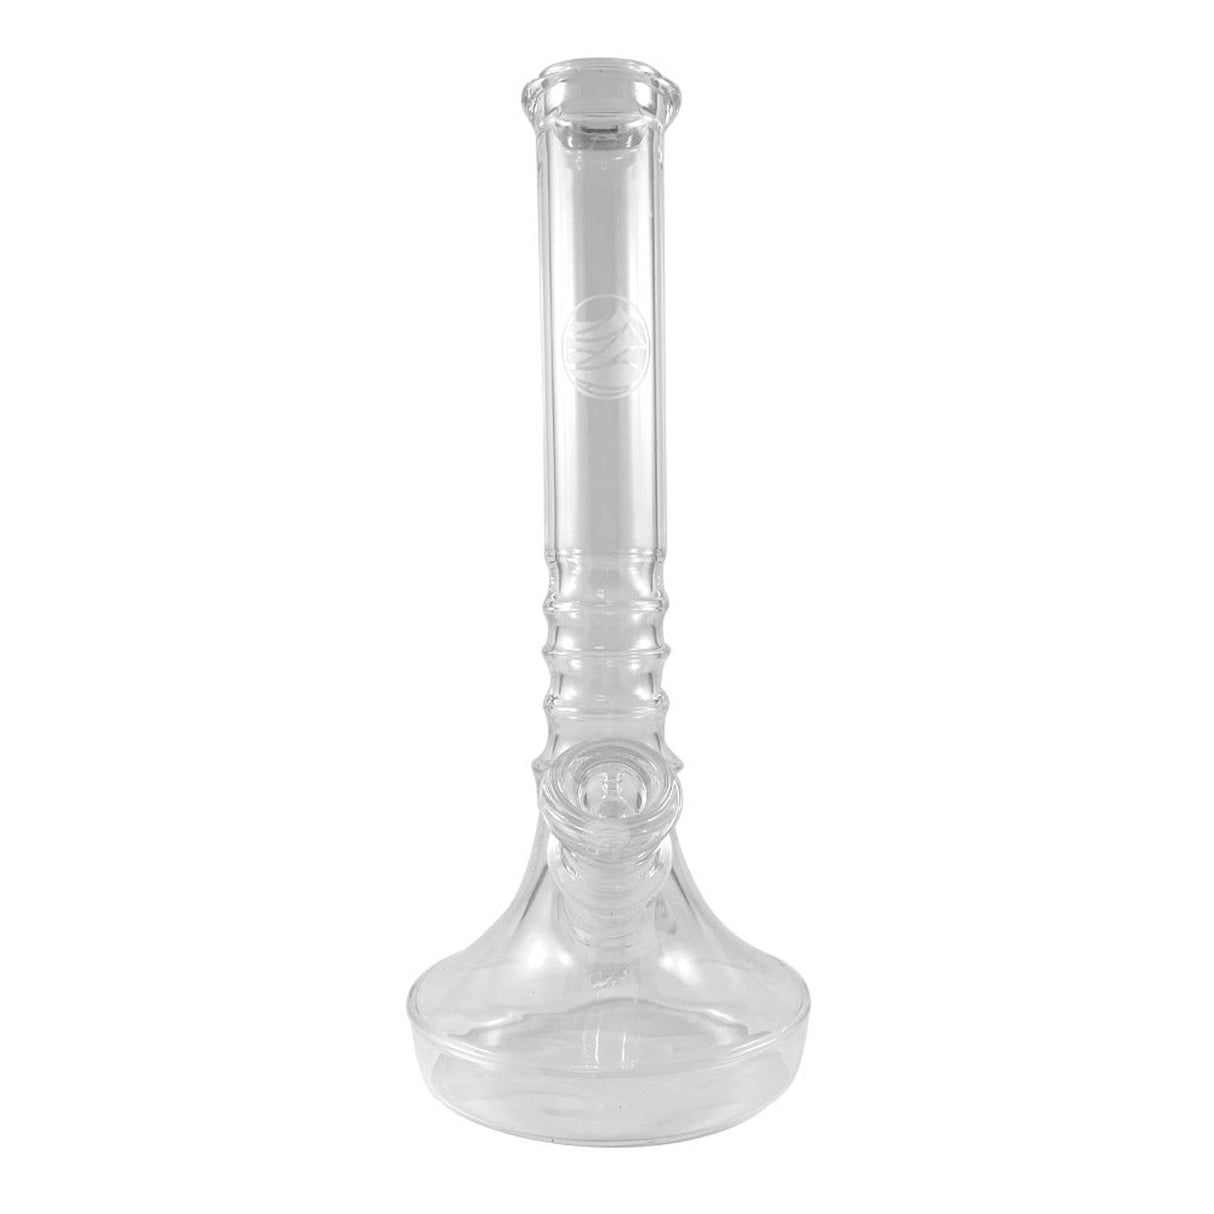 Nami Glass 12" Ripple Beaker Bong with clear glass design, front view on white background